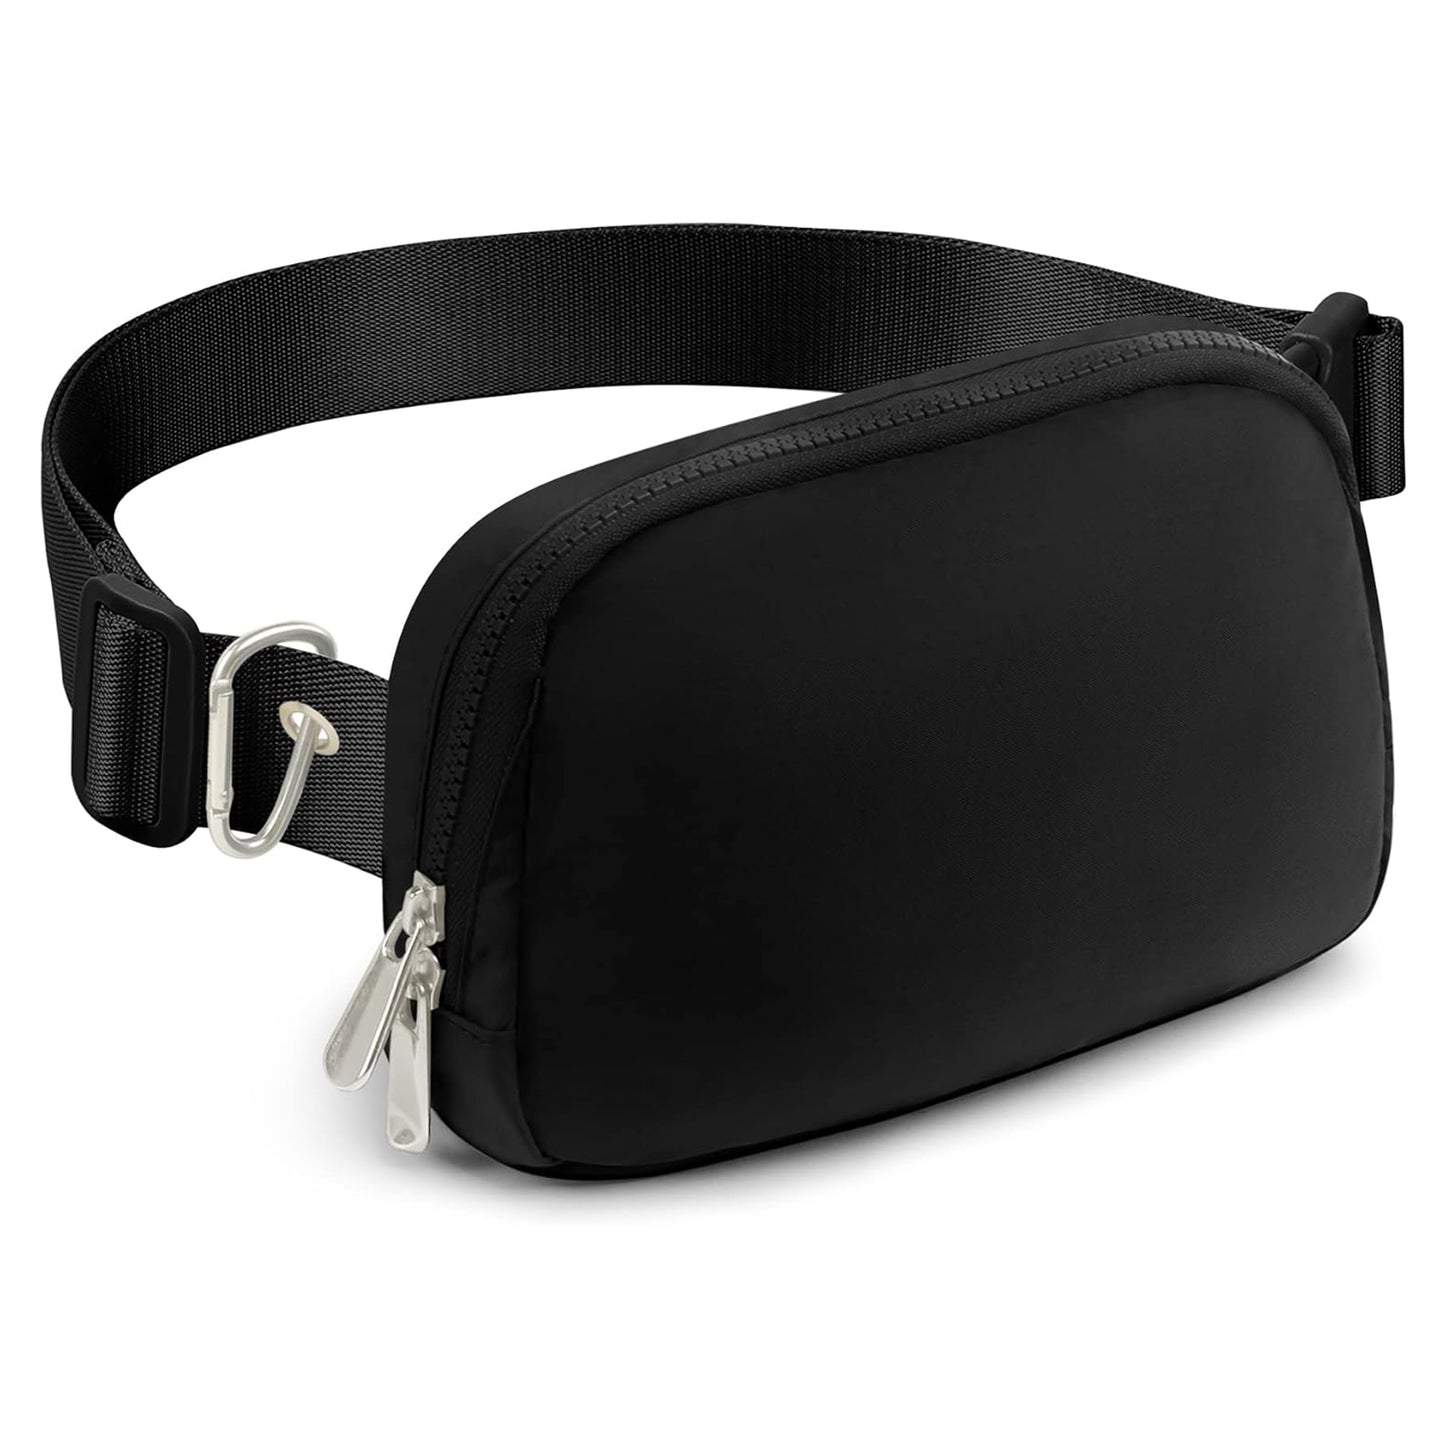 Viconow Fanny Packs for Women Men RFID, Black Waterproof Crossbody Belt Bag with Adjustable Strap Waist Pack for Running Travelling Hiking